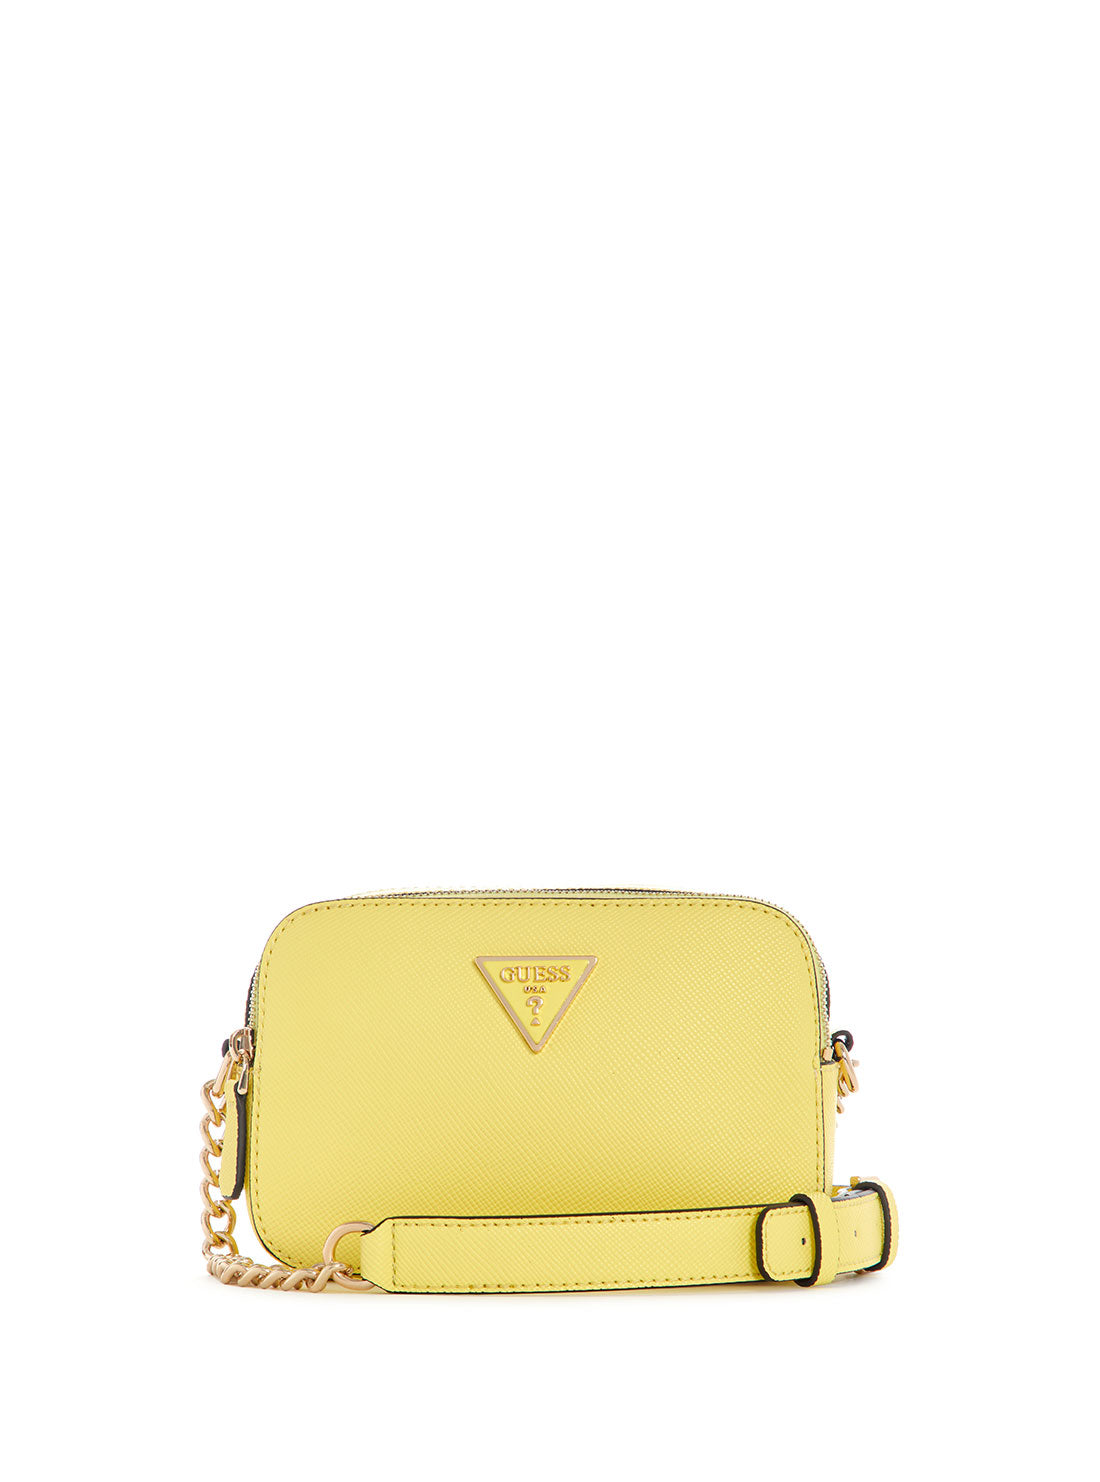 GUESS Women's Yellow Noelle Crossbody Camera Bag ZG787913 Front View